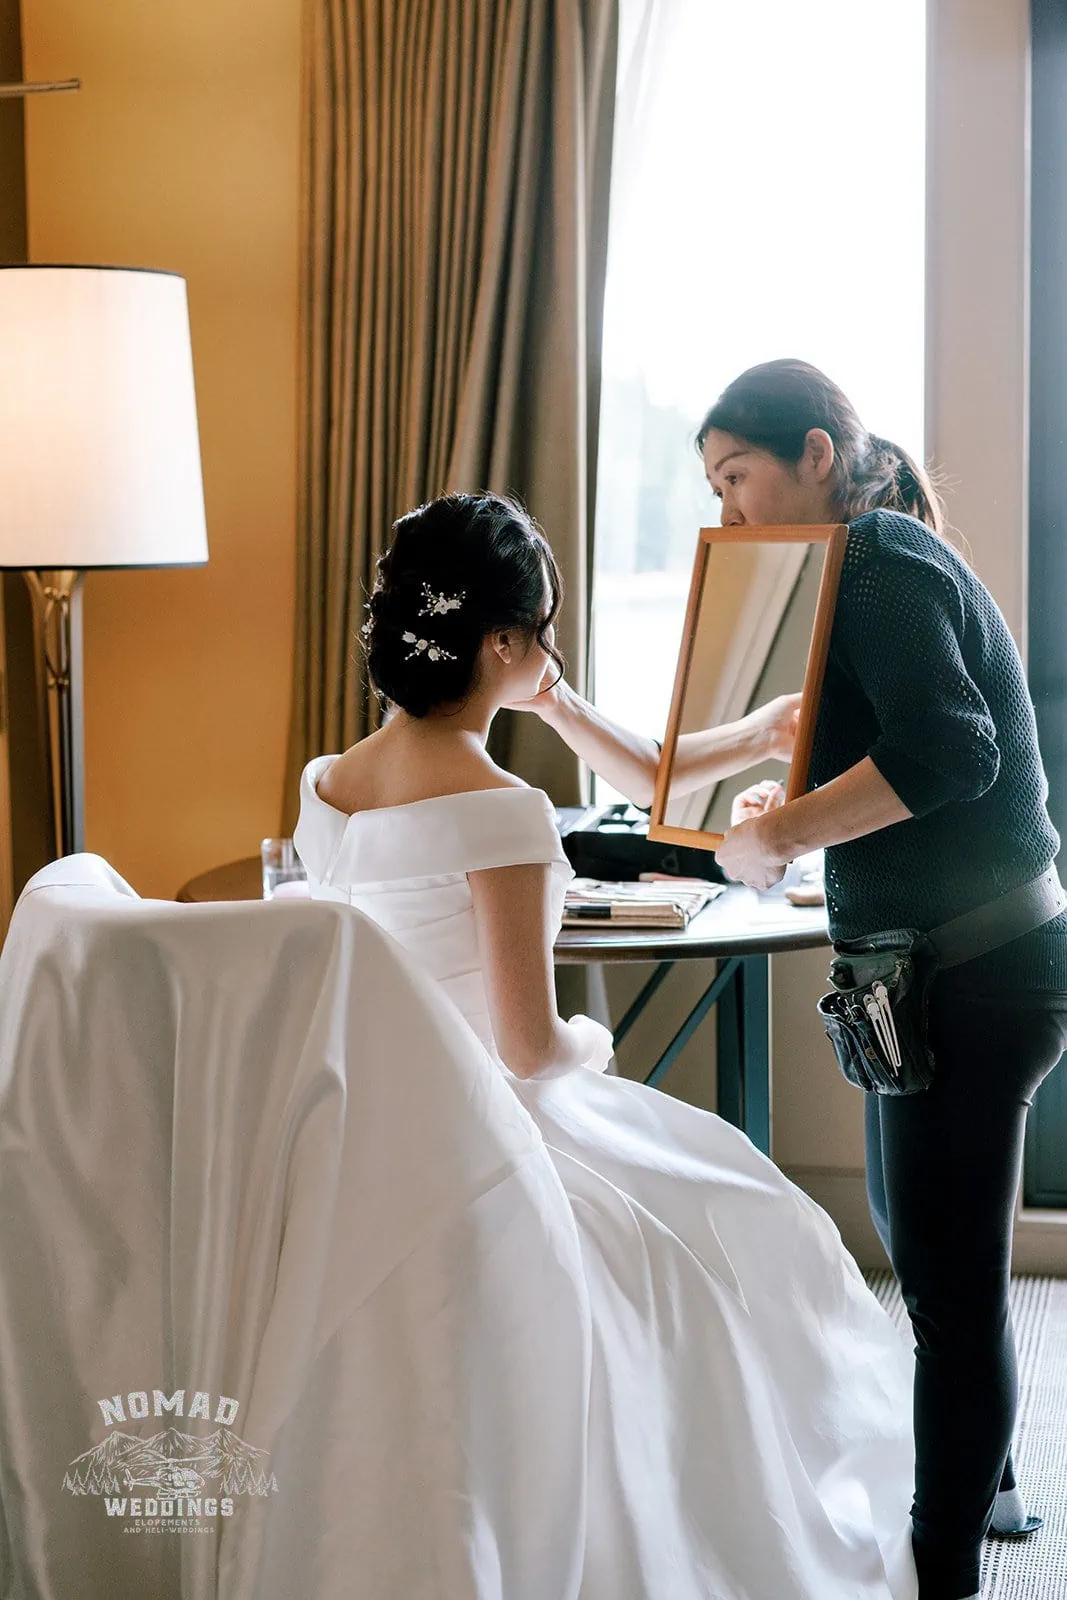 Queenstown New Zealand Elopement Wedding Photographer - A bride getting her makeup done for her Bo and Junyi Heli Pre Wedding Shoot in a hotel room.